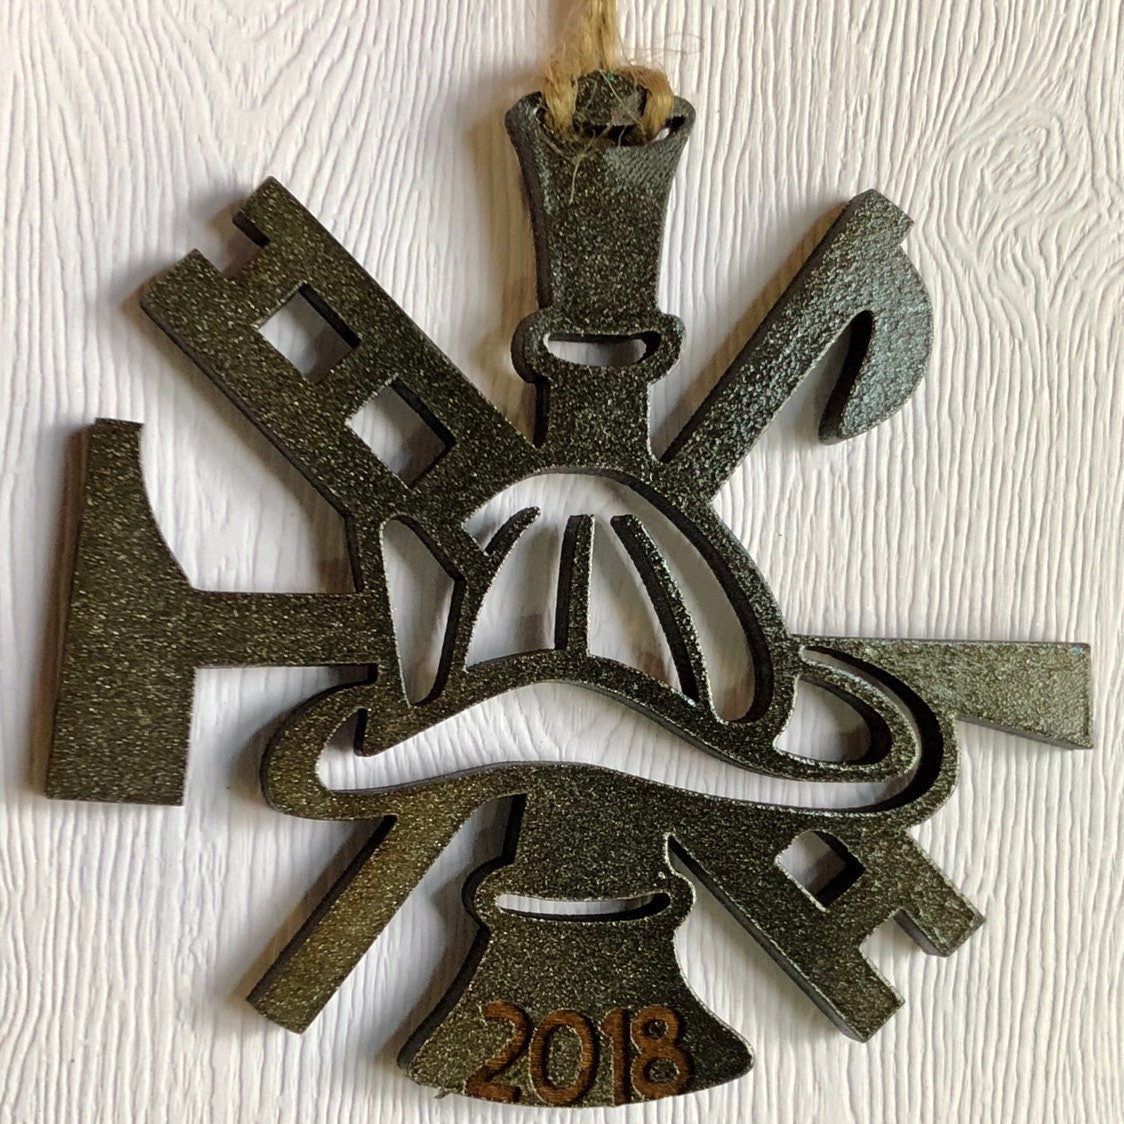 Firefighter Christmas Ornament Etched with Year in Metallic